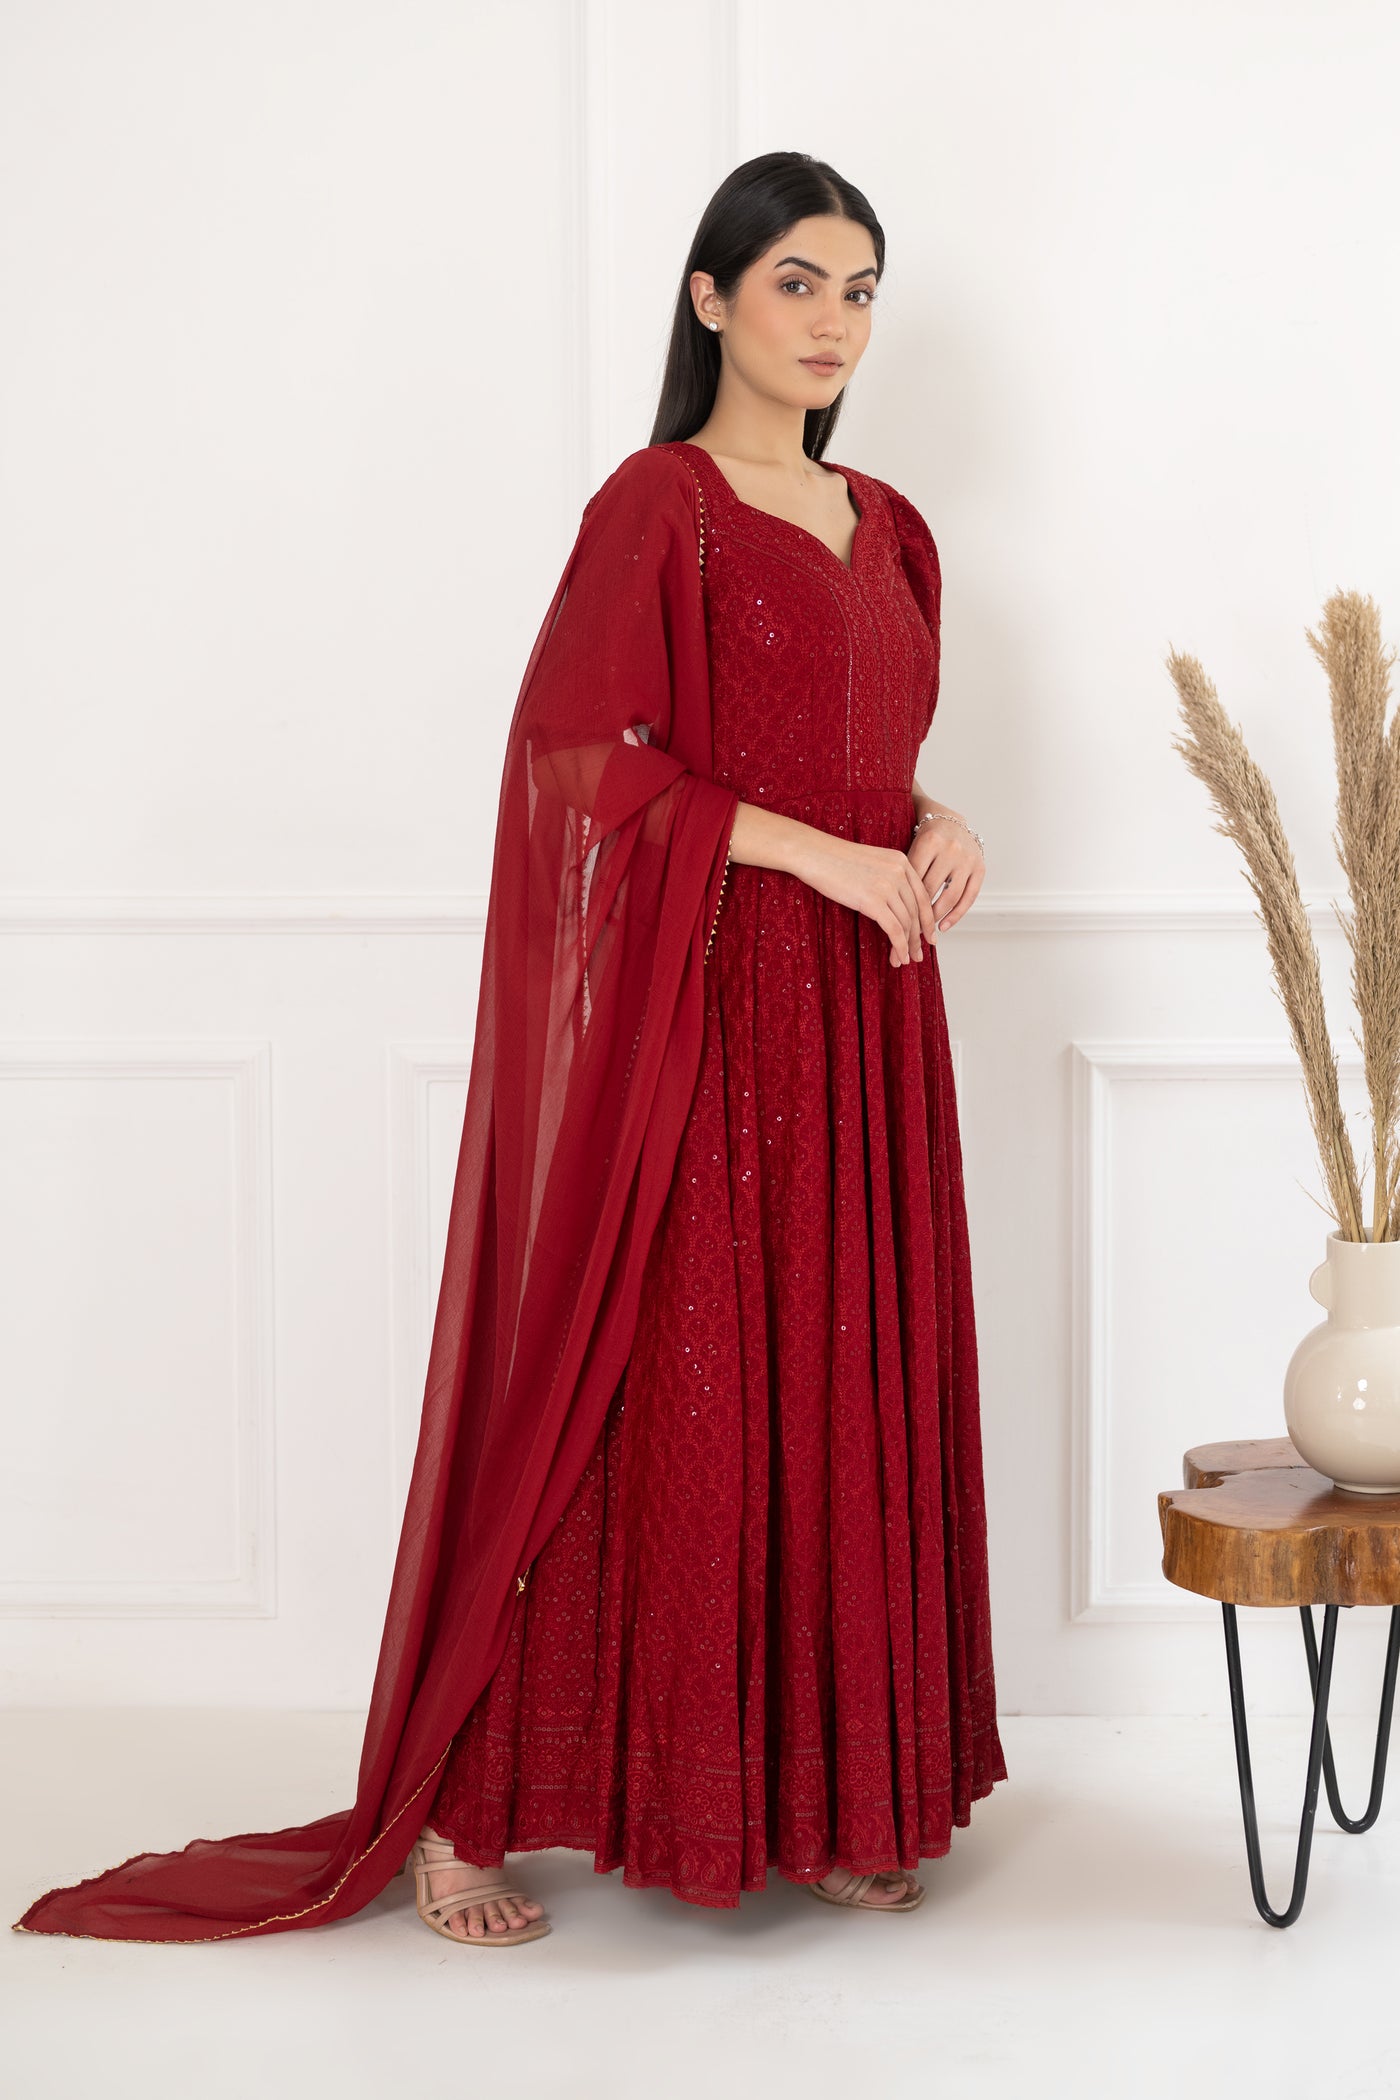 Women's Red Sequin Embroidered Dress with Dupatta by Saras The Label (2 Pc Set)